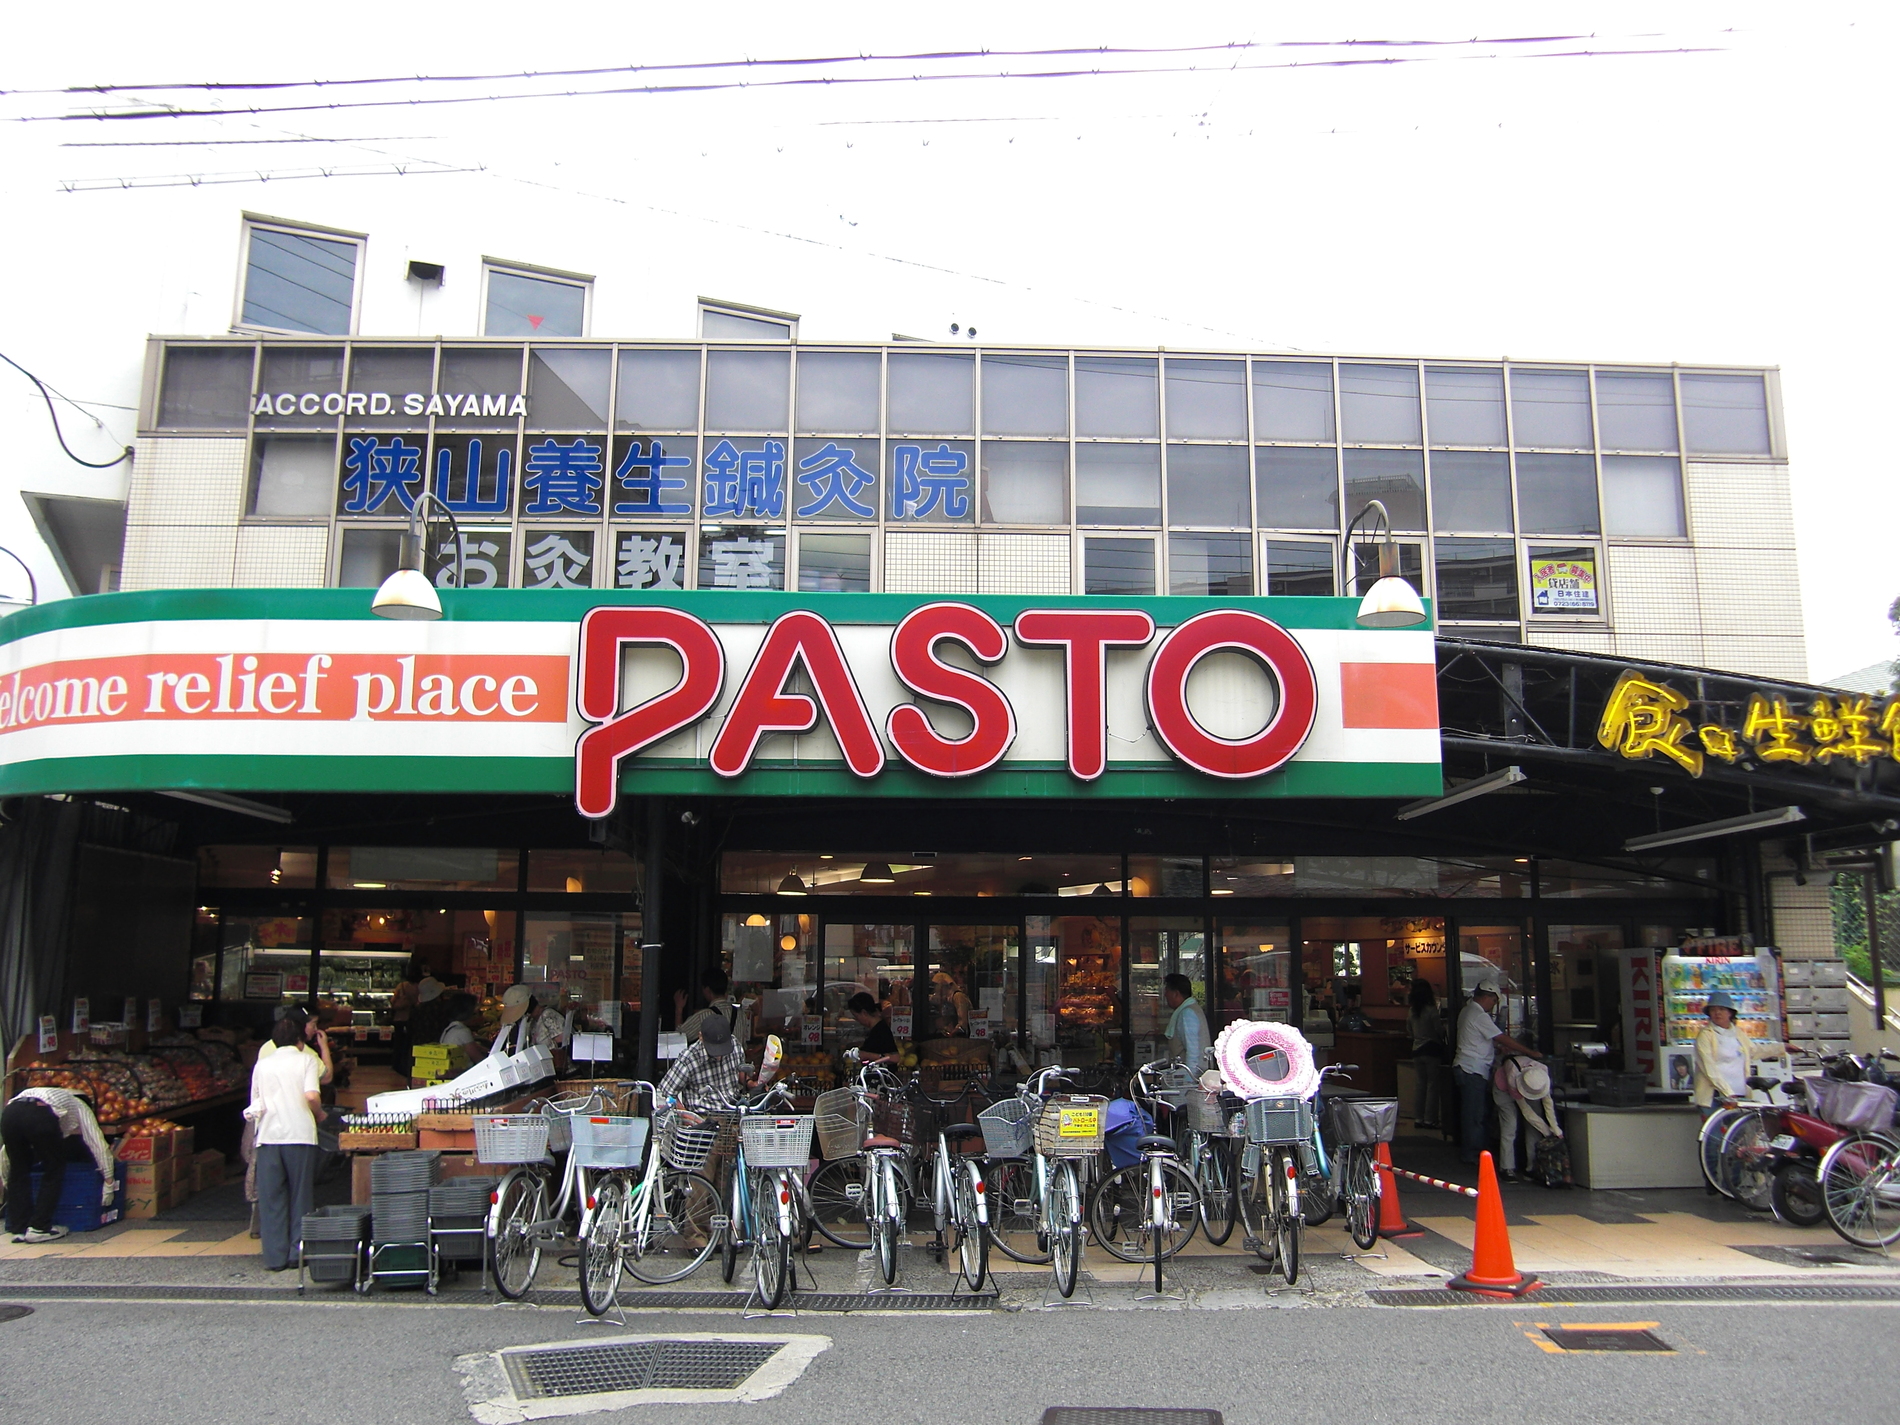 Supermarket. Convenient supermarket 1100m day-to-day shopping to Super Pasto. It is possible to go in about 4 minutes that's bicycle